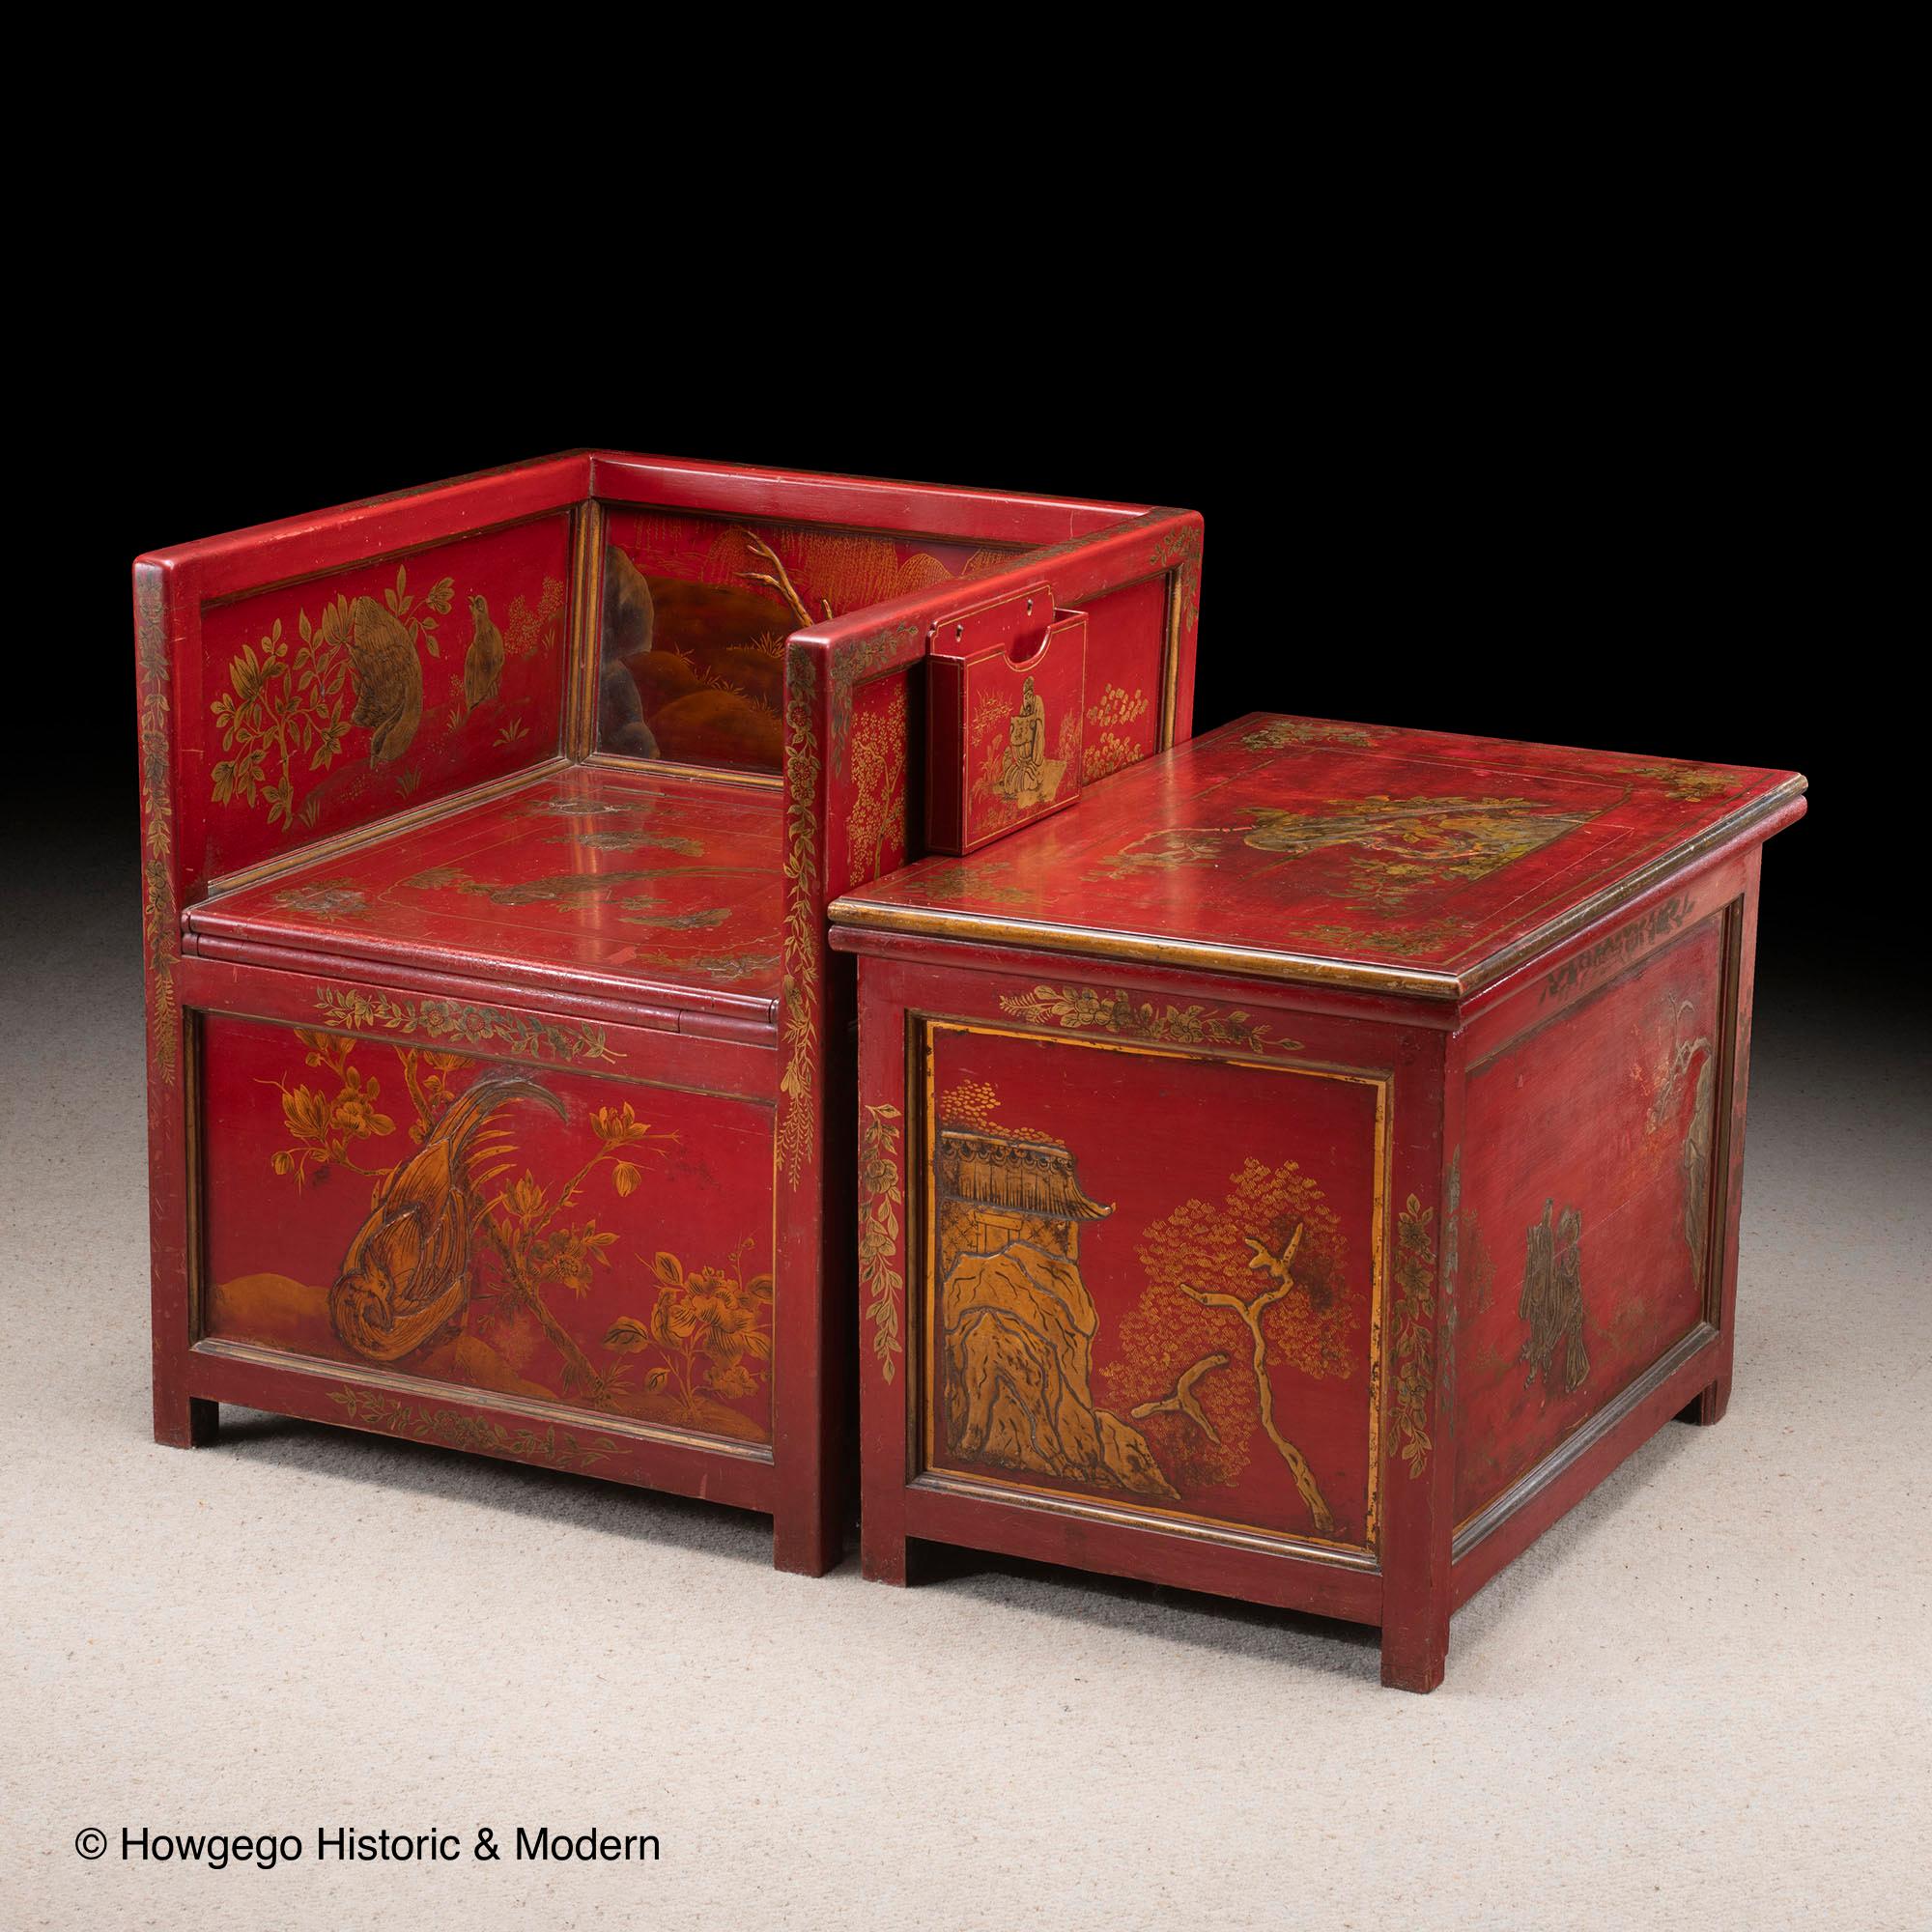 Rare red lacquer, Chinoiserie water closed and matching table cupboard from the Collection of the Duke & Duchess of Northumberland, Alnwick Castle of Harry Potter fame
Dating from c1900 revival of Chinoiserie schemes in Country Houses
High quality